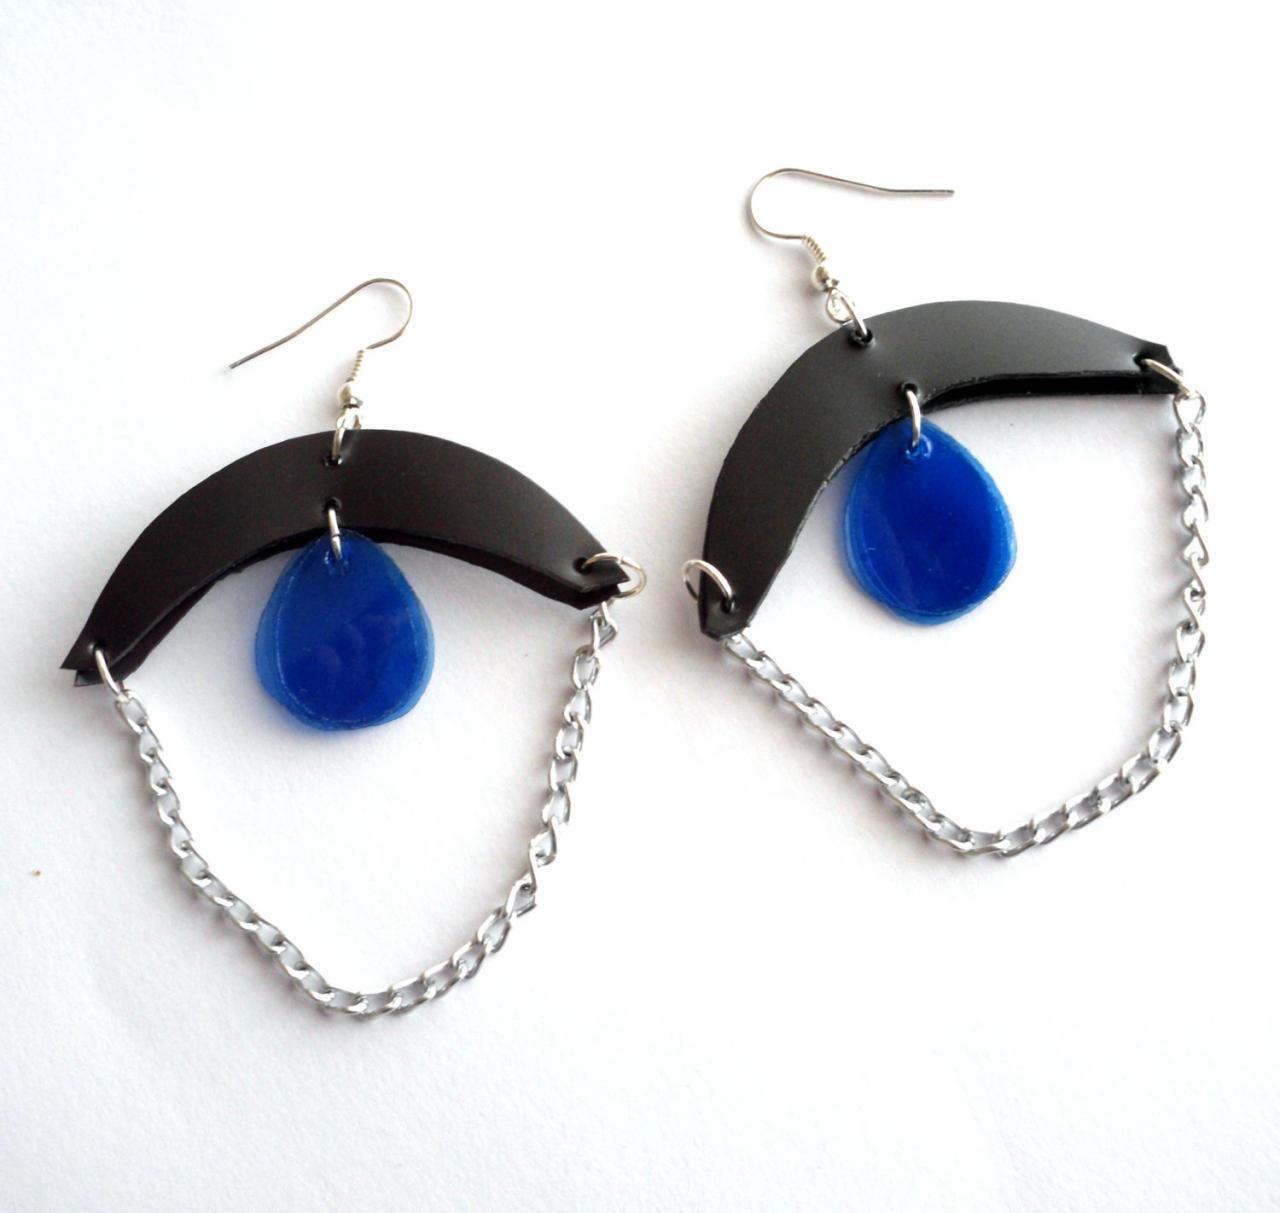 Blue & Black Upcycled Jewelry Set: Earrings And Necklace, Crescent Moon, Handmade Of Recycled Plastic Bottles With Silver Chain, Goth,